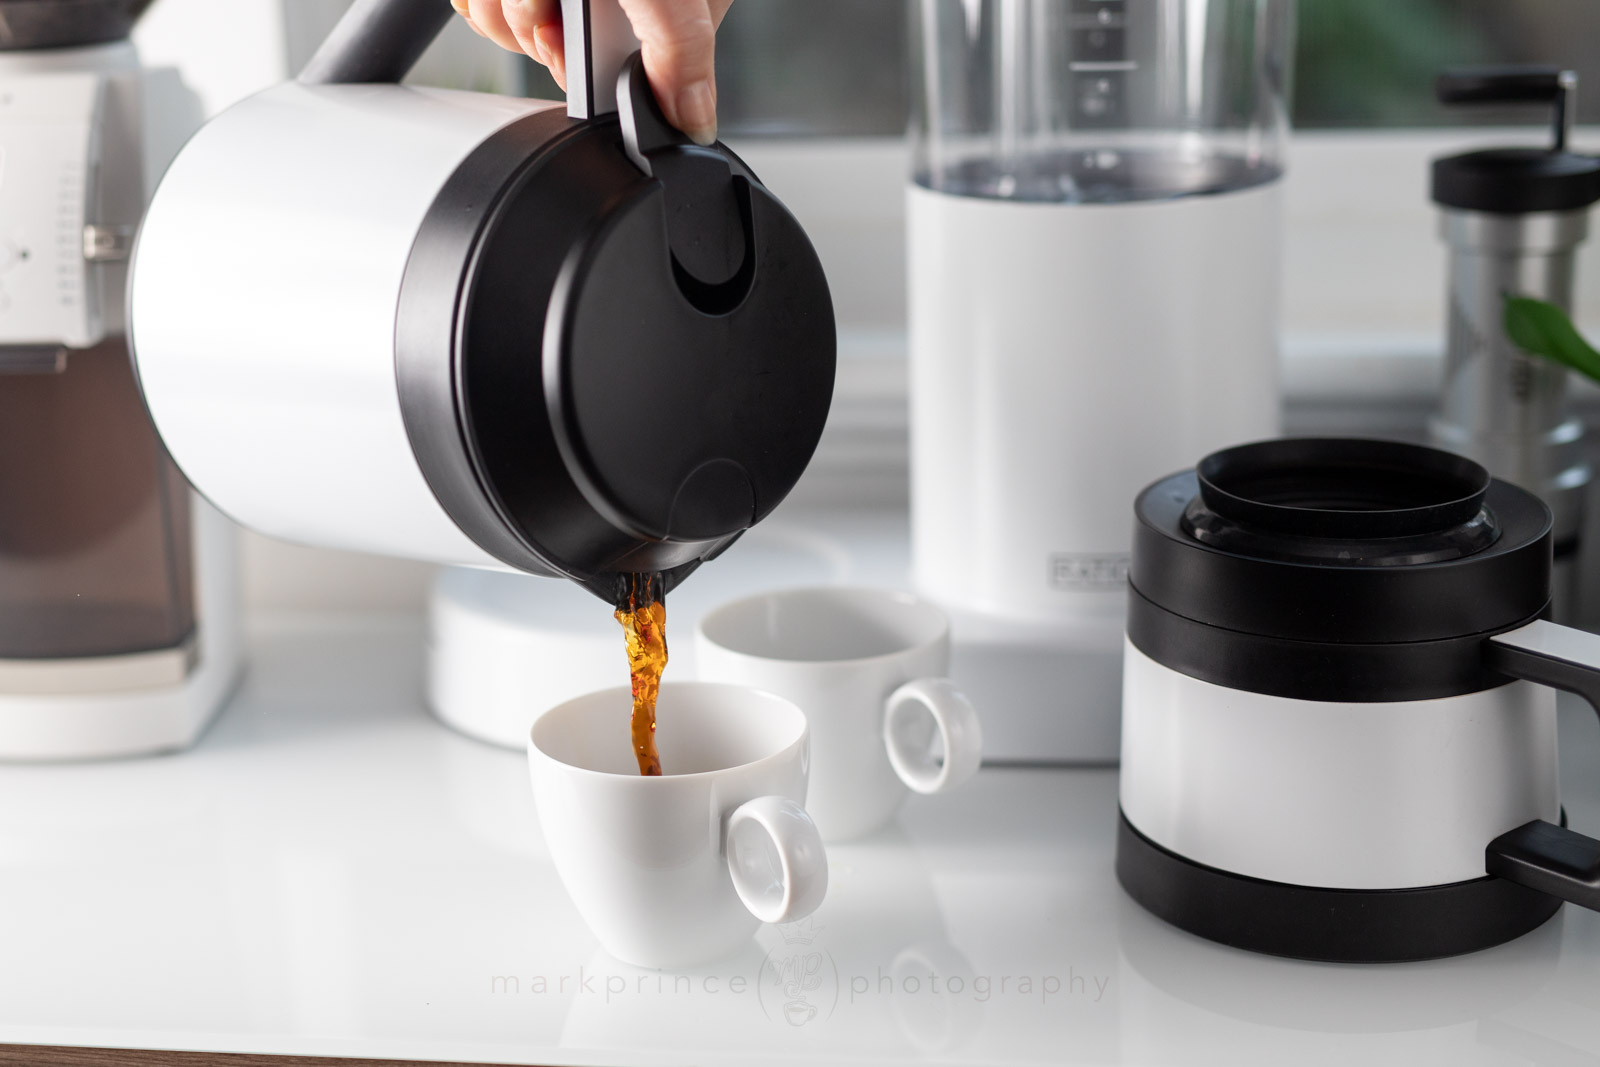 Ratio Six Coffee Maker Review: A Brilliant Hands-Free Pour-Over